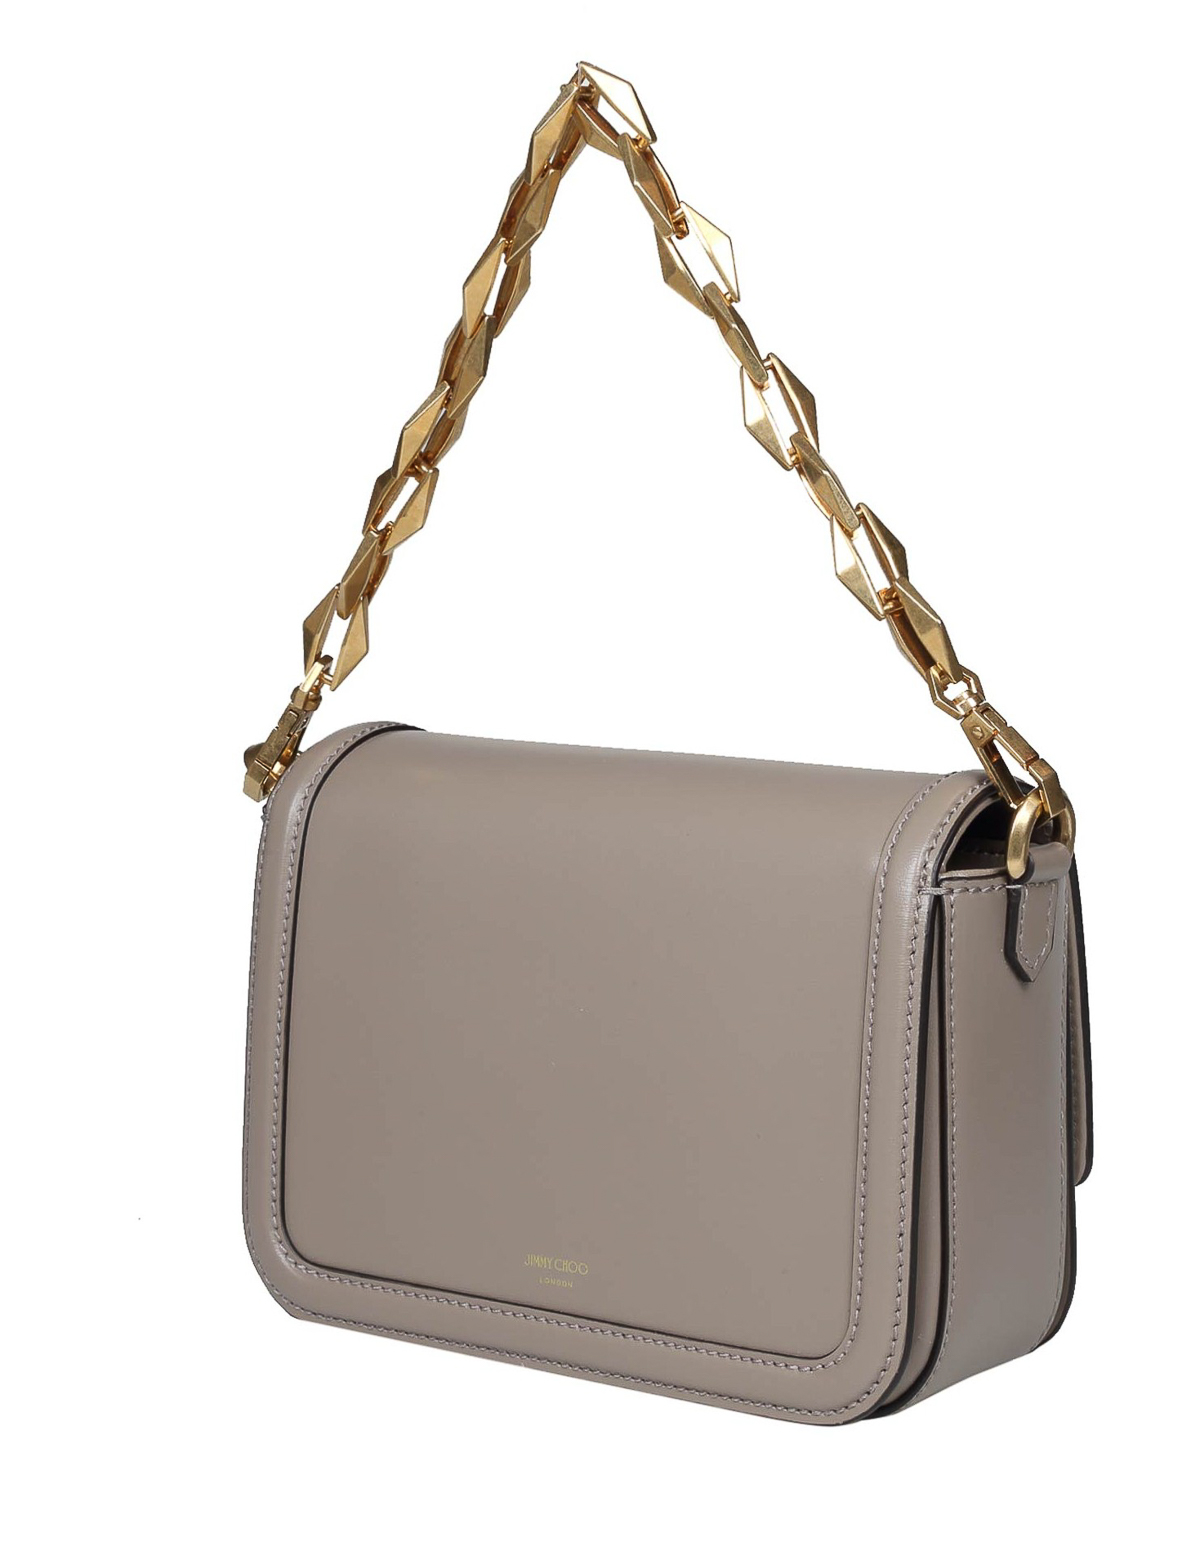 Shop Jimmy Choo Diamond Crossbody Bag In Leather In Taupe